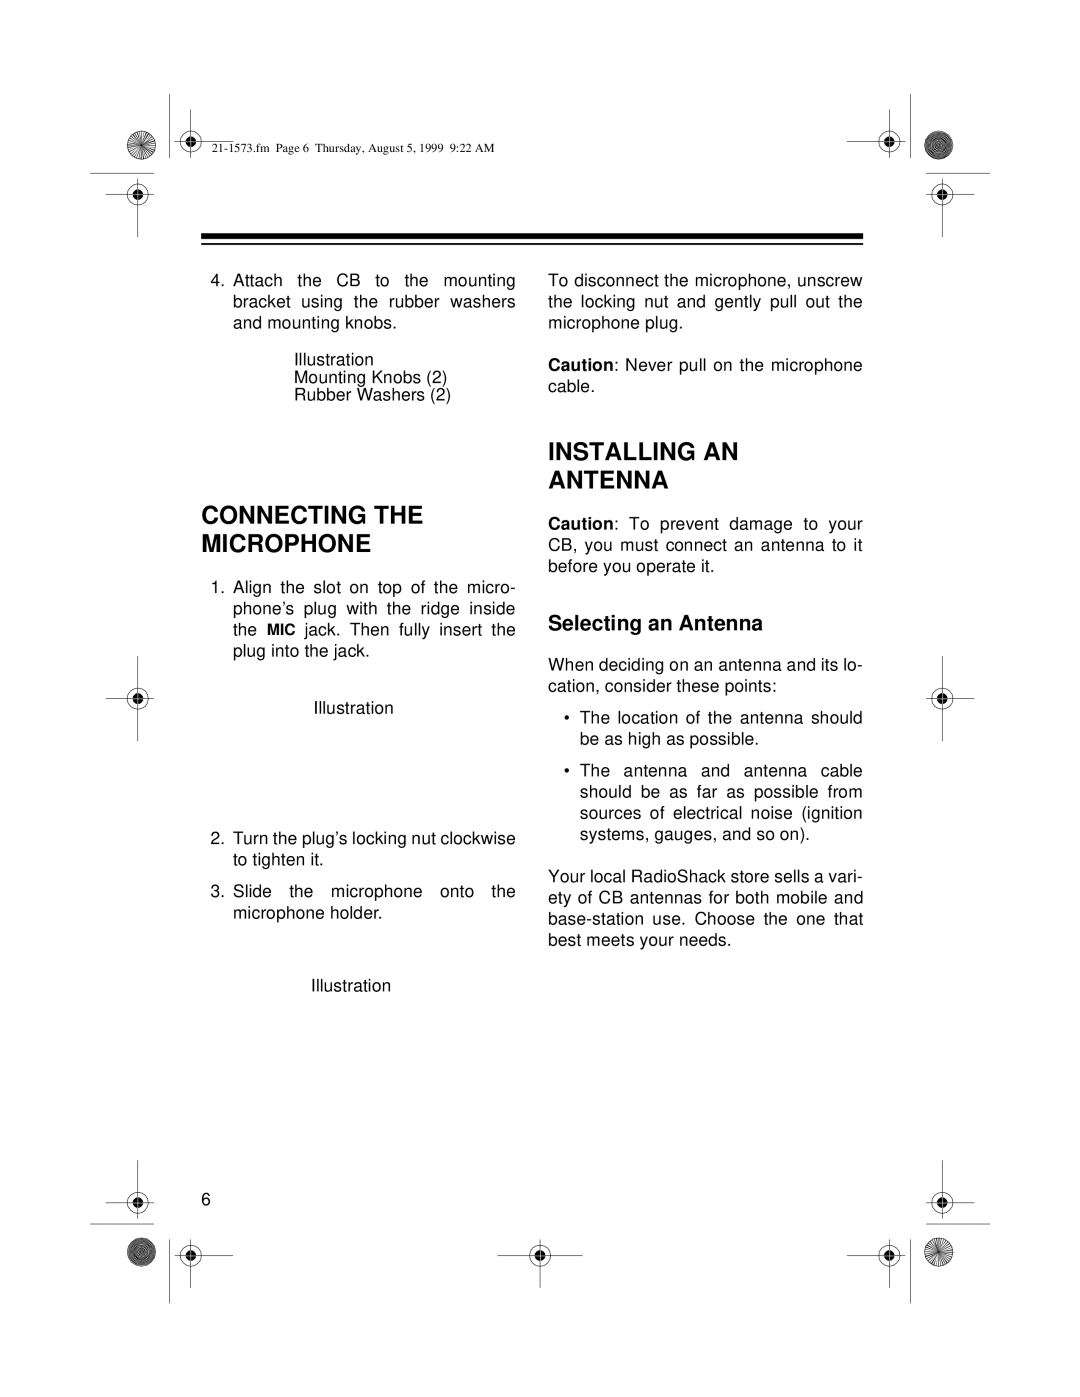 Samsung TRC-445 owner manual Connecting The Microphone, Installing An Antenna, Selecting an Antenna 